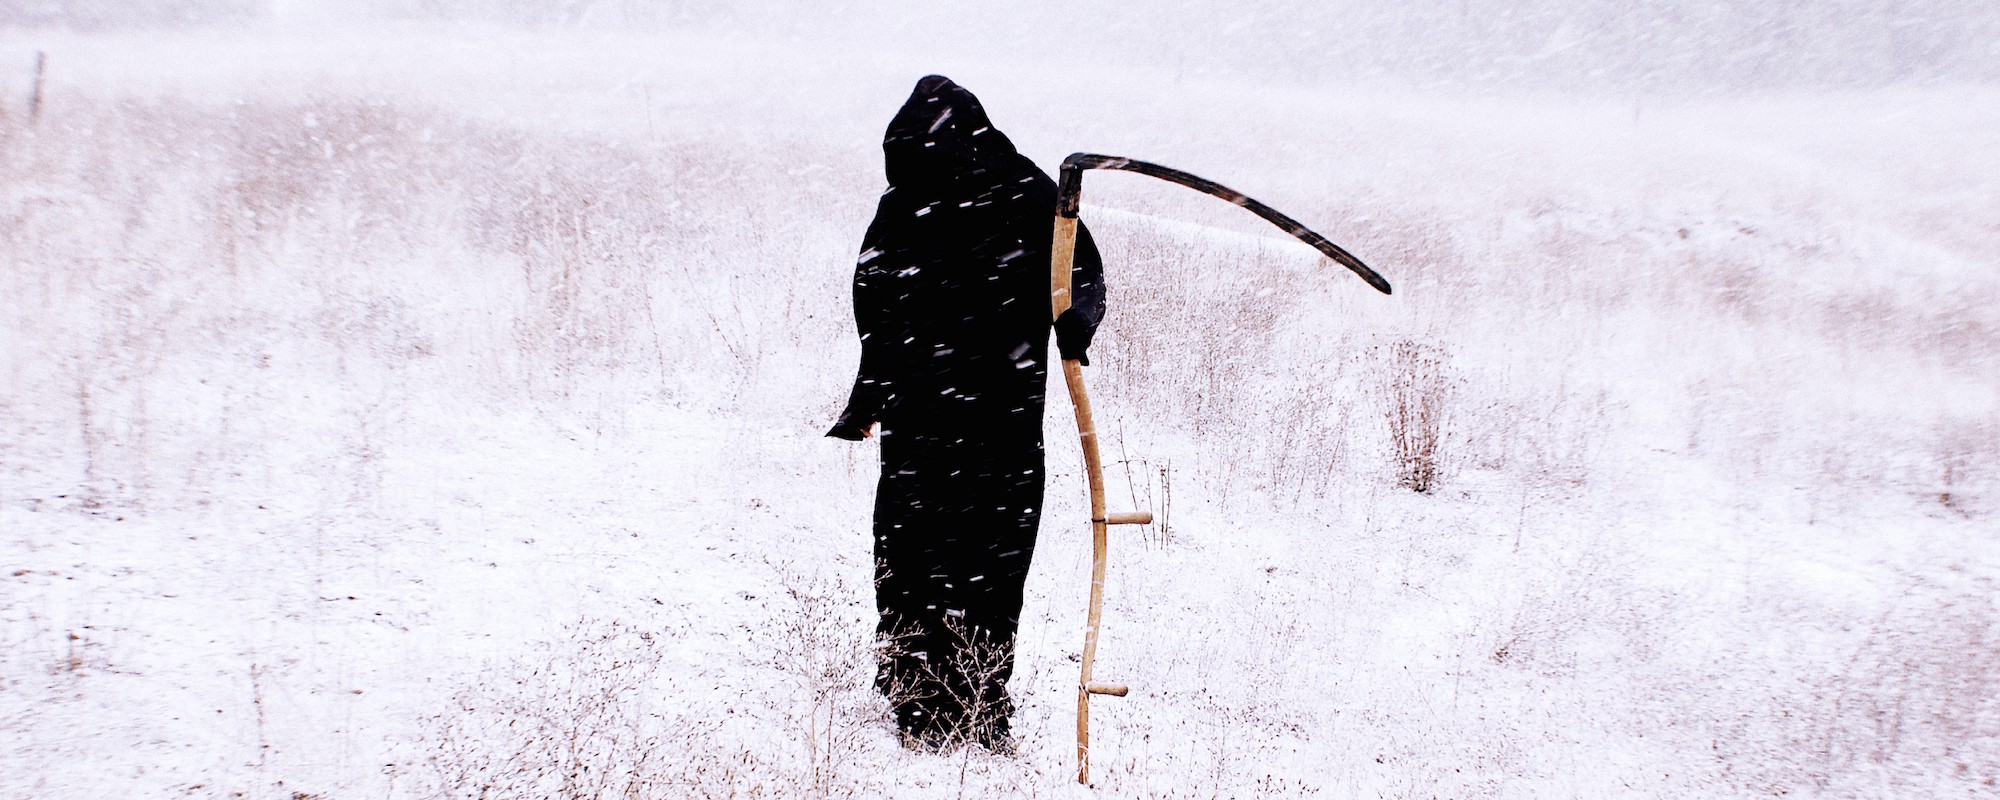 A person dressed as death, in a long black hooded robe with a scythe, stands in a snowy field.